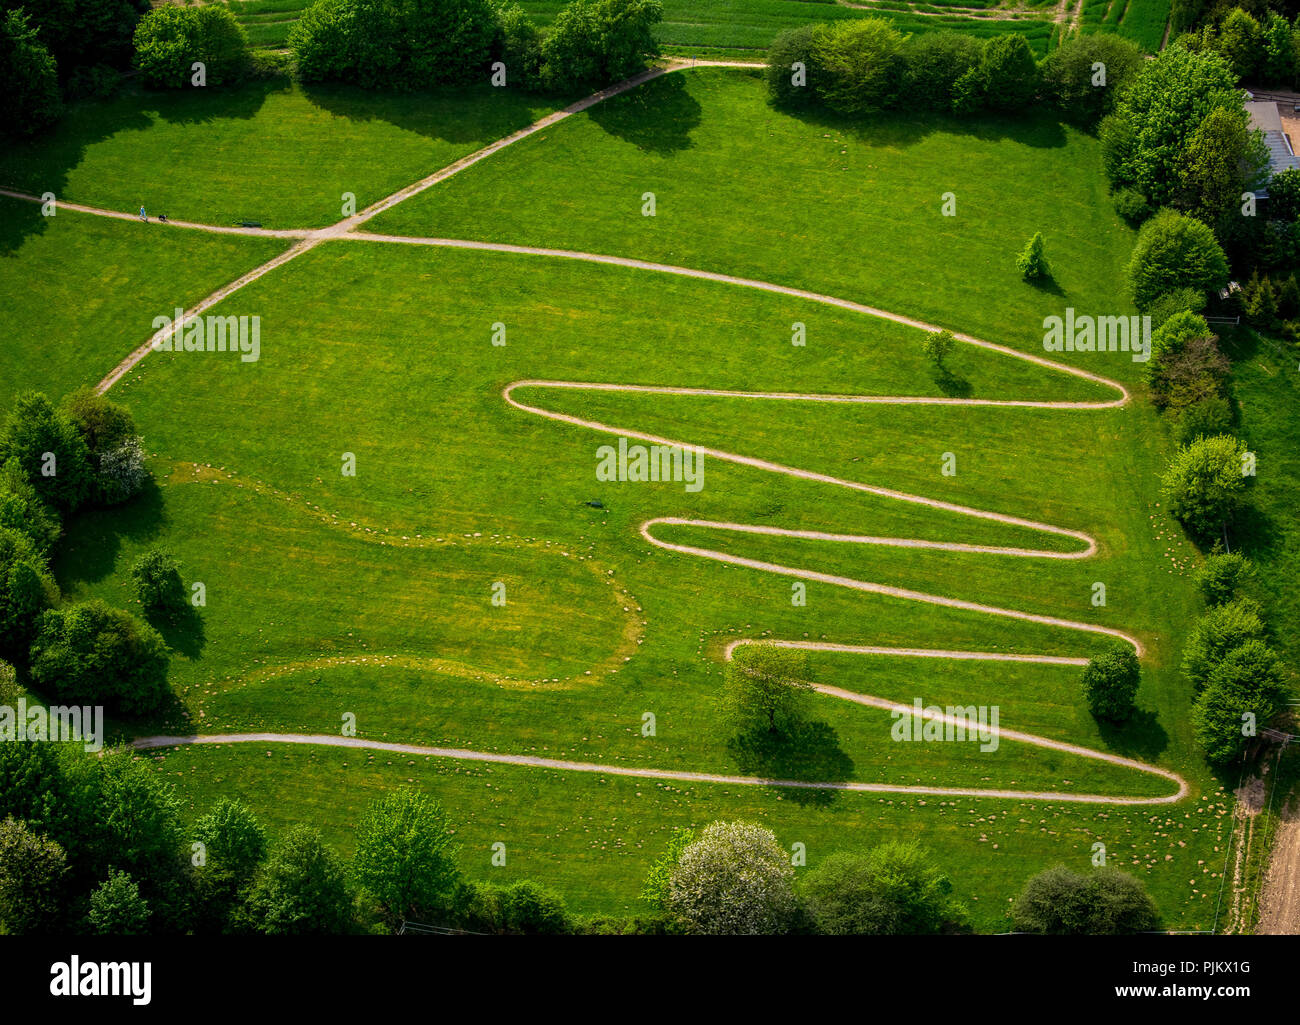 Serpentine path for cardiac patients, path in the form of amplitudes, zig-zag path, hiking trail in zig-zag curves, Ennepetal, Ruhr area, North Rhine-Westphalia, Germany Stock Photo